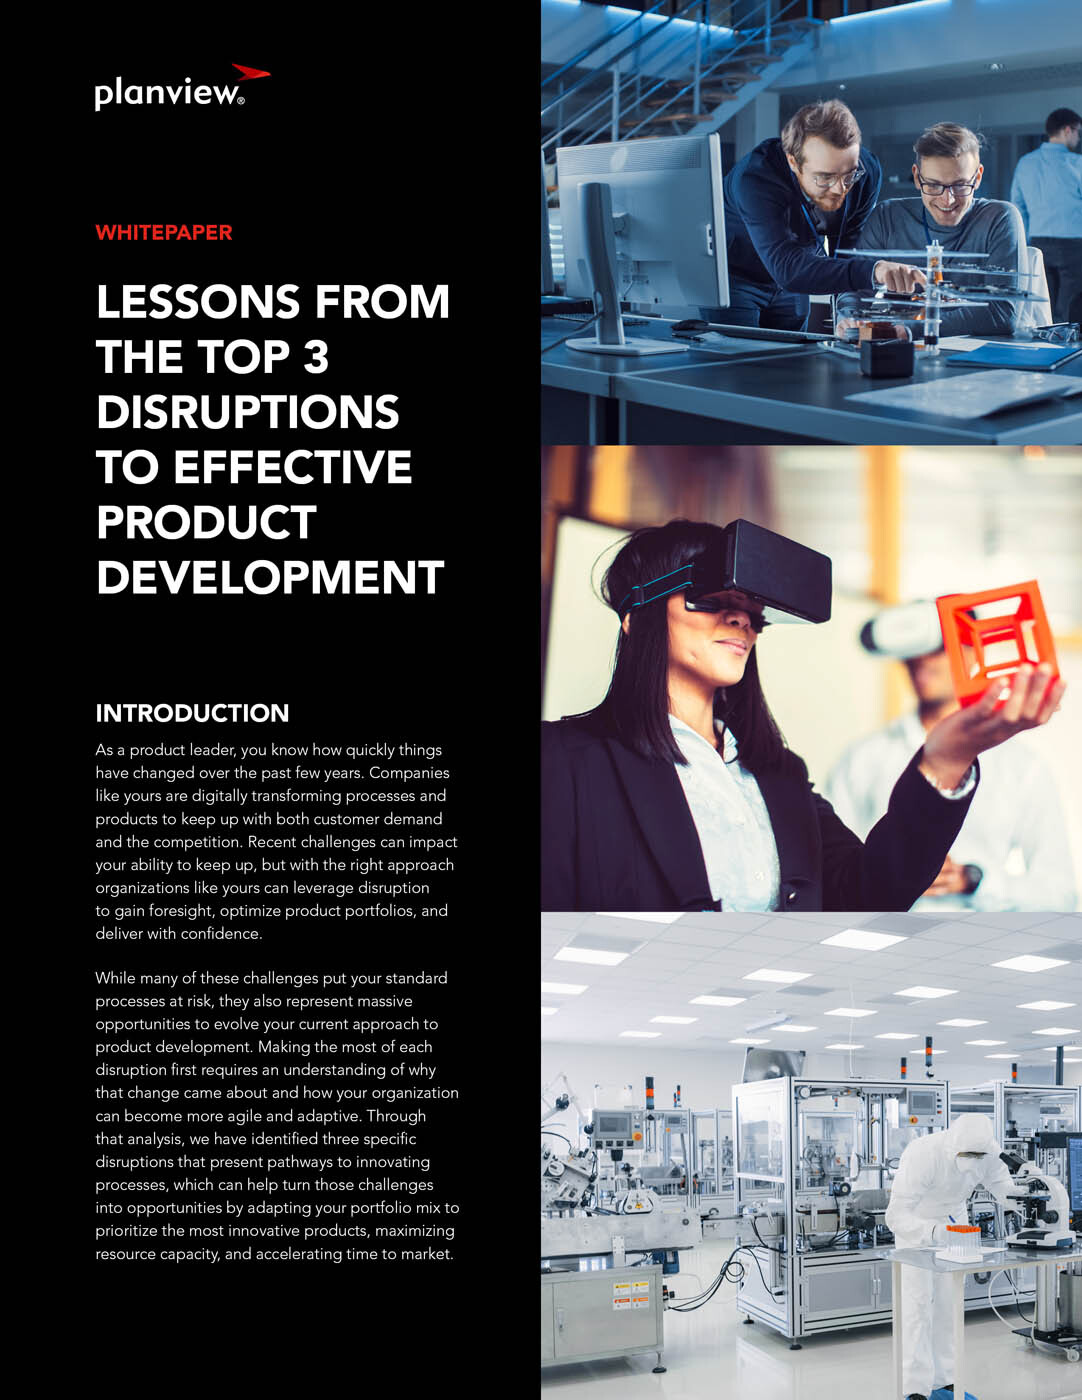 Top 3 Disruptions to Effective Product Development